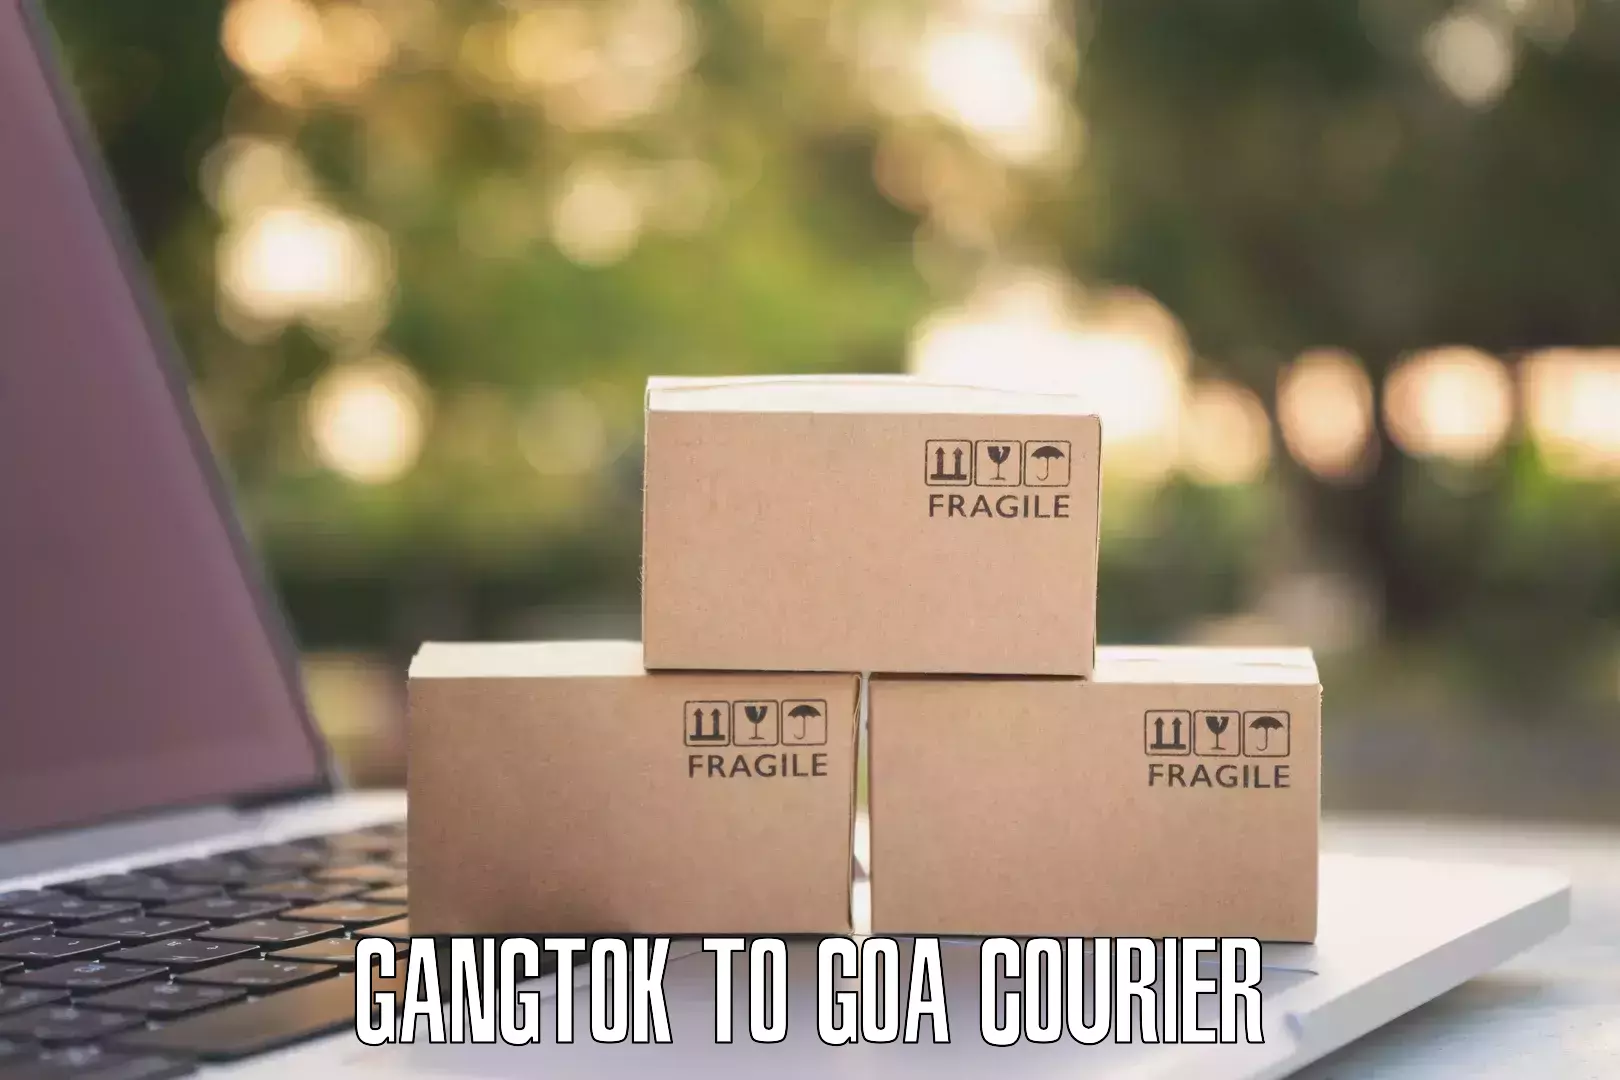 State-of-the-art courier technology Gangtok to Bicholim